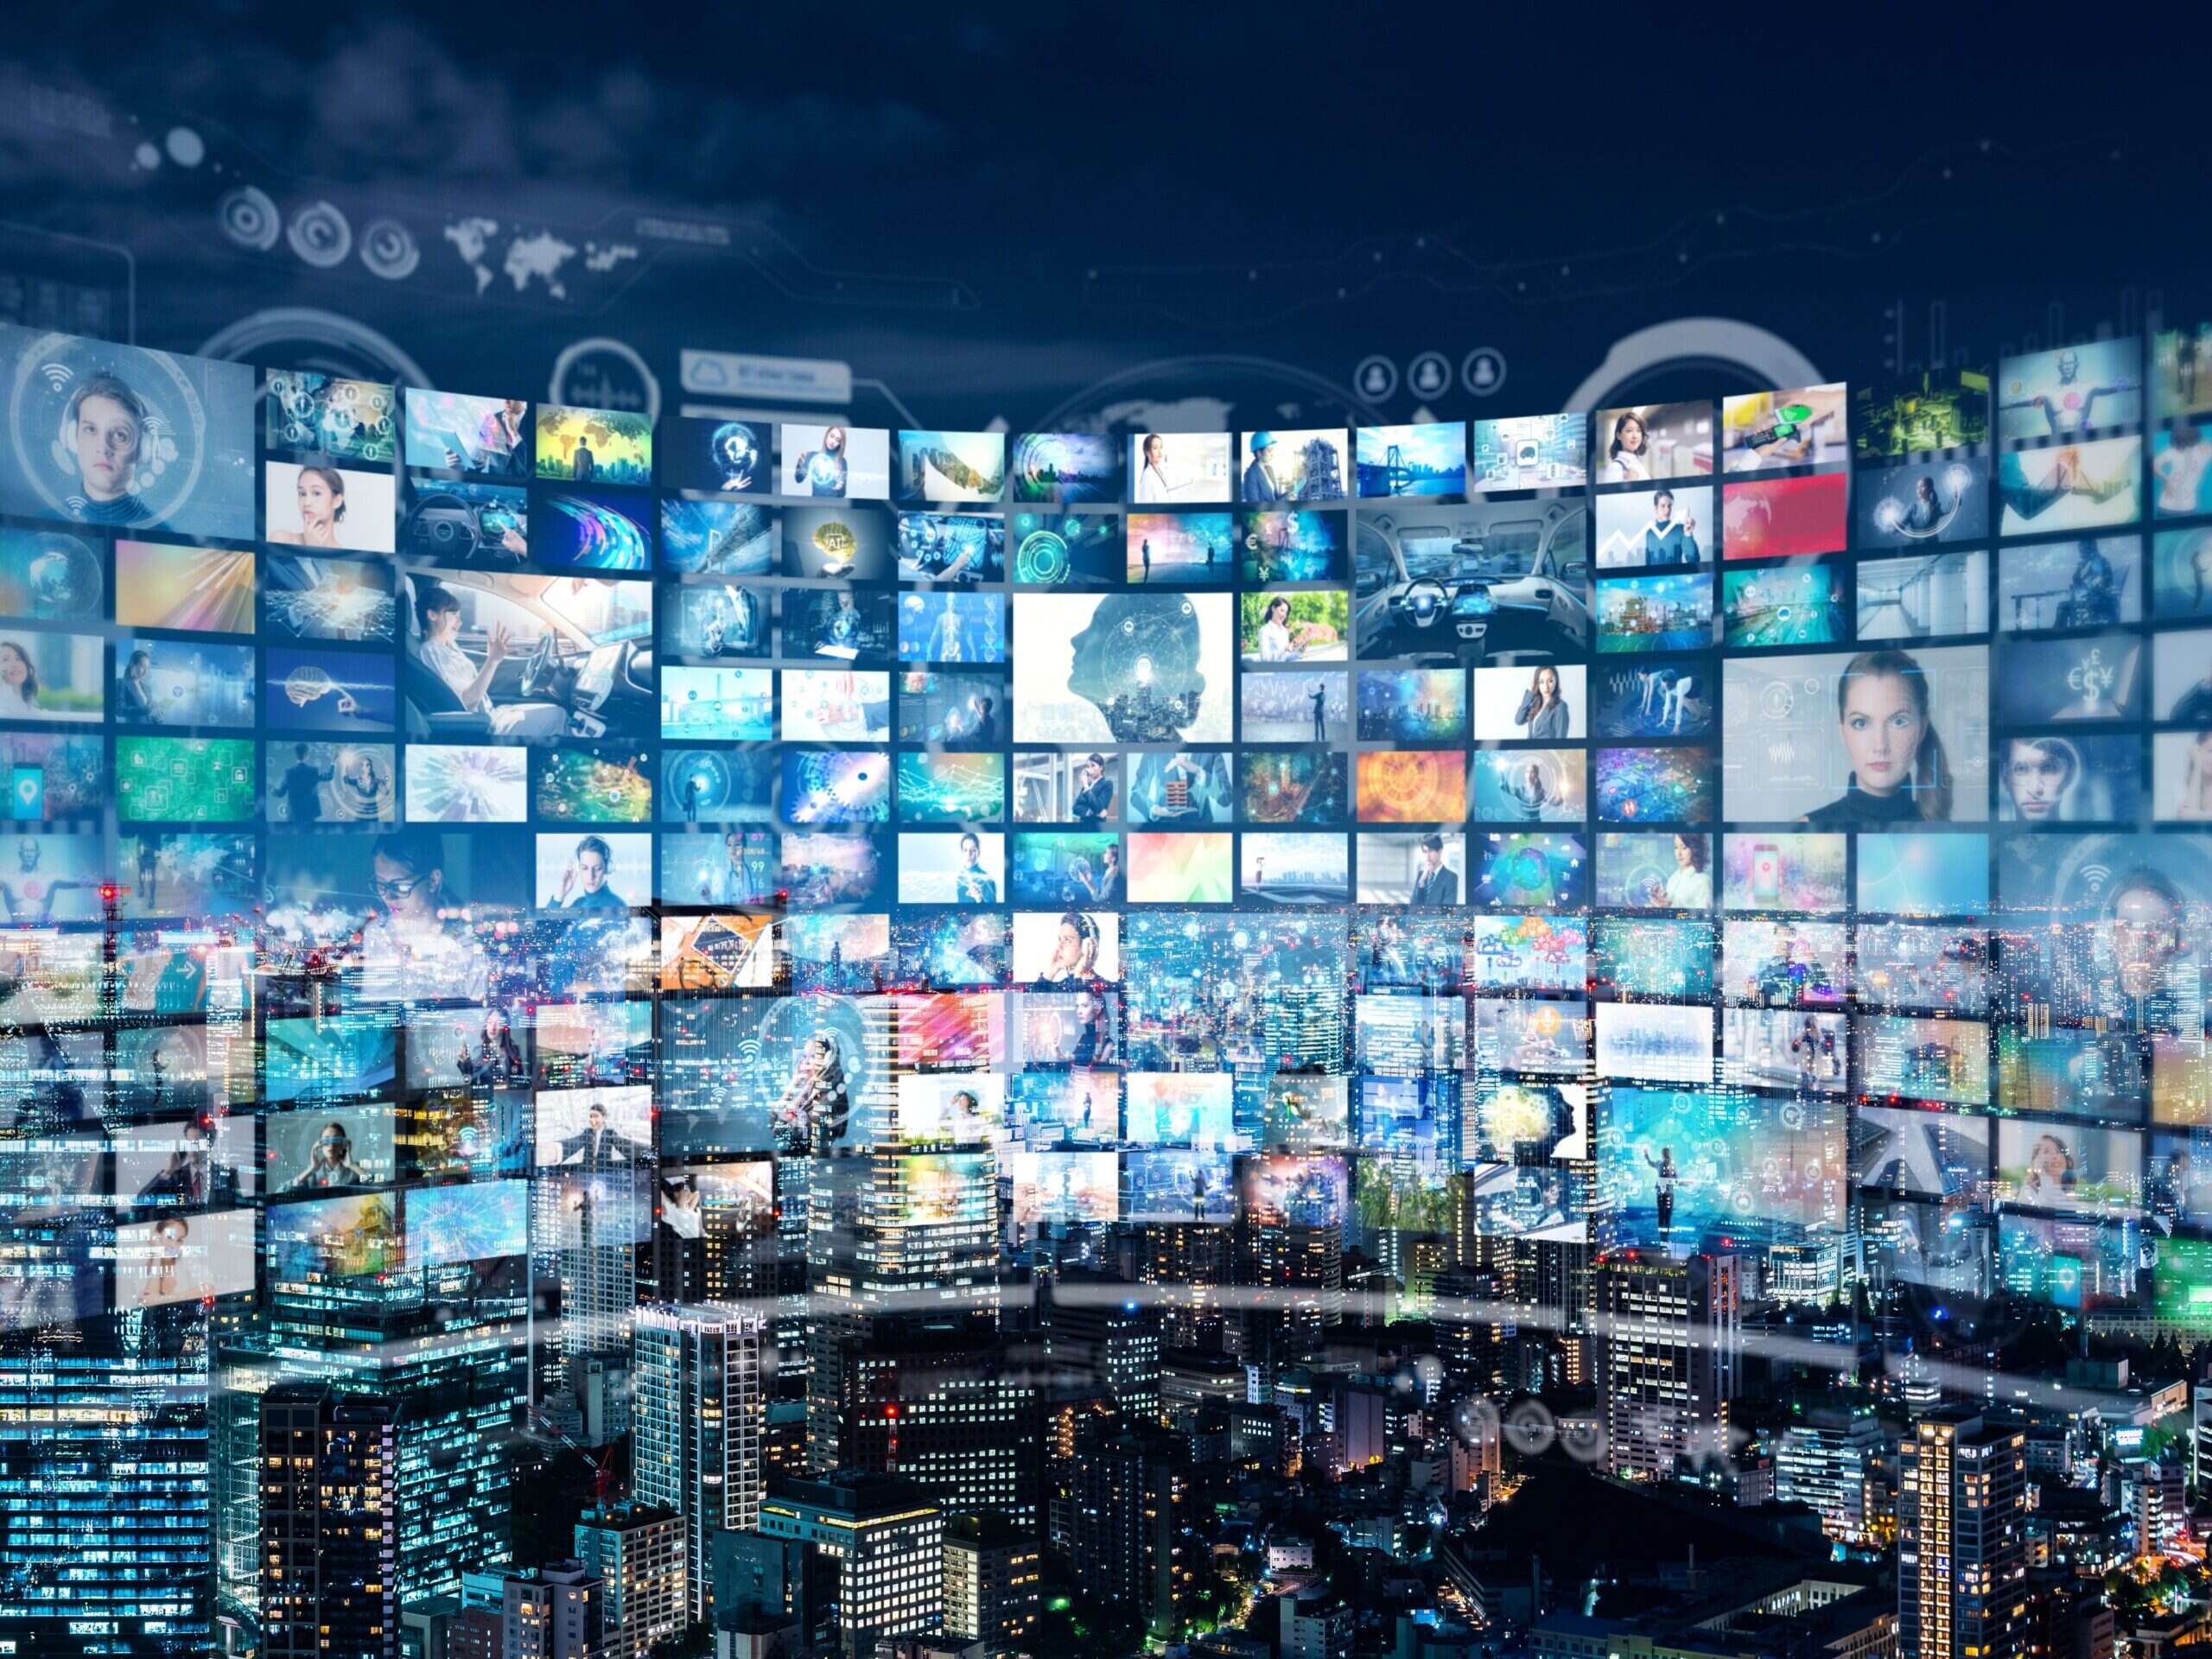 Publisher, retailer or platform - it's time to decide: Seven media and tech predictions for 2021